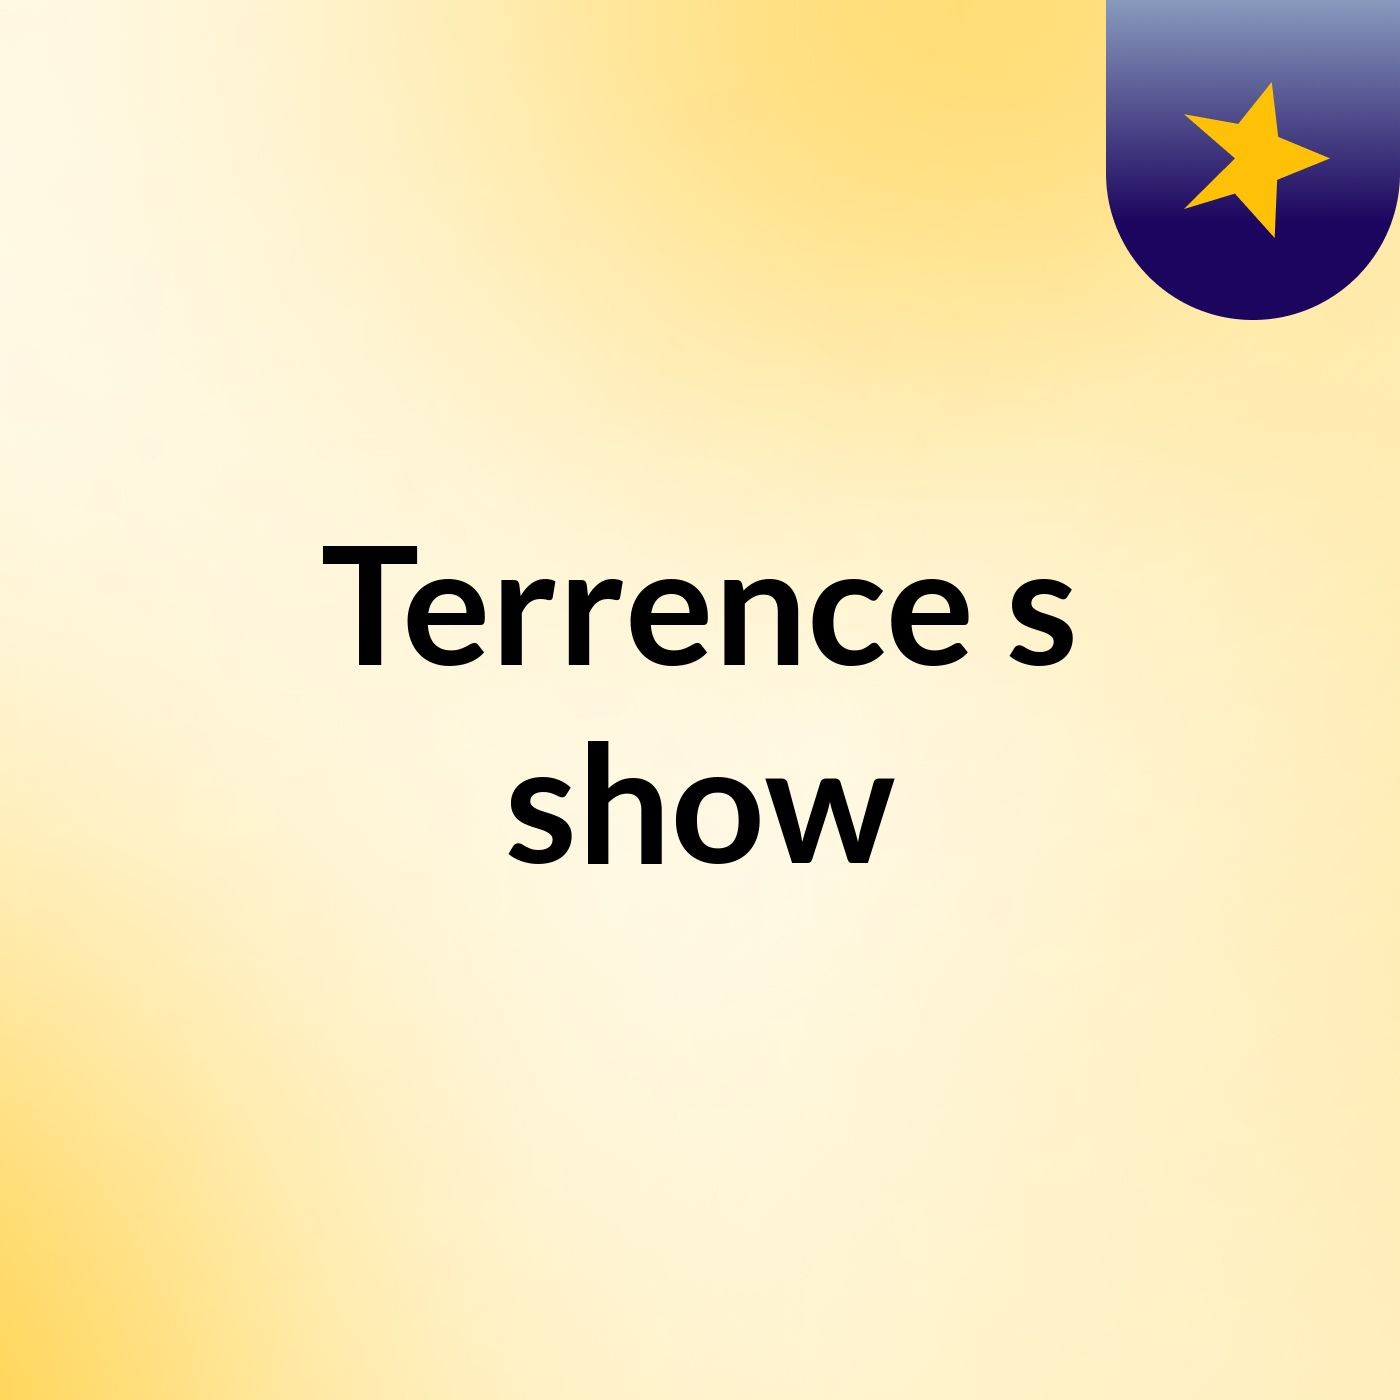 Terrence's show